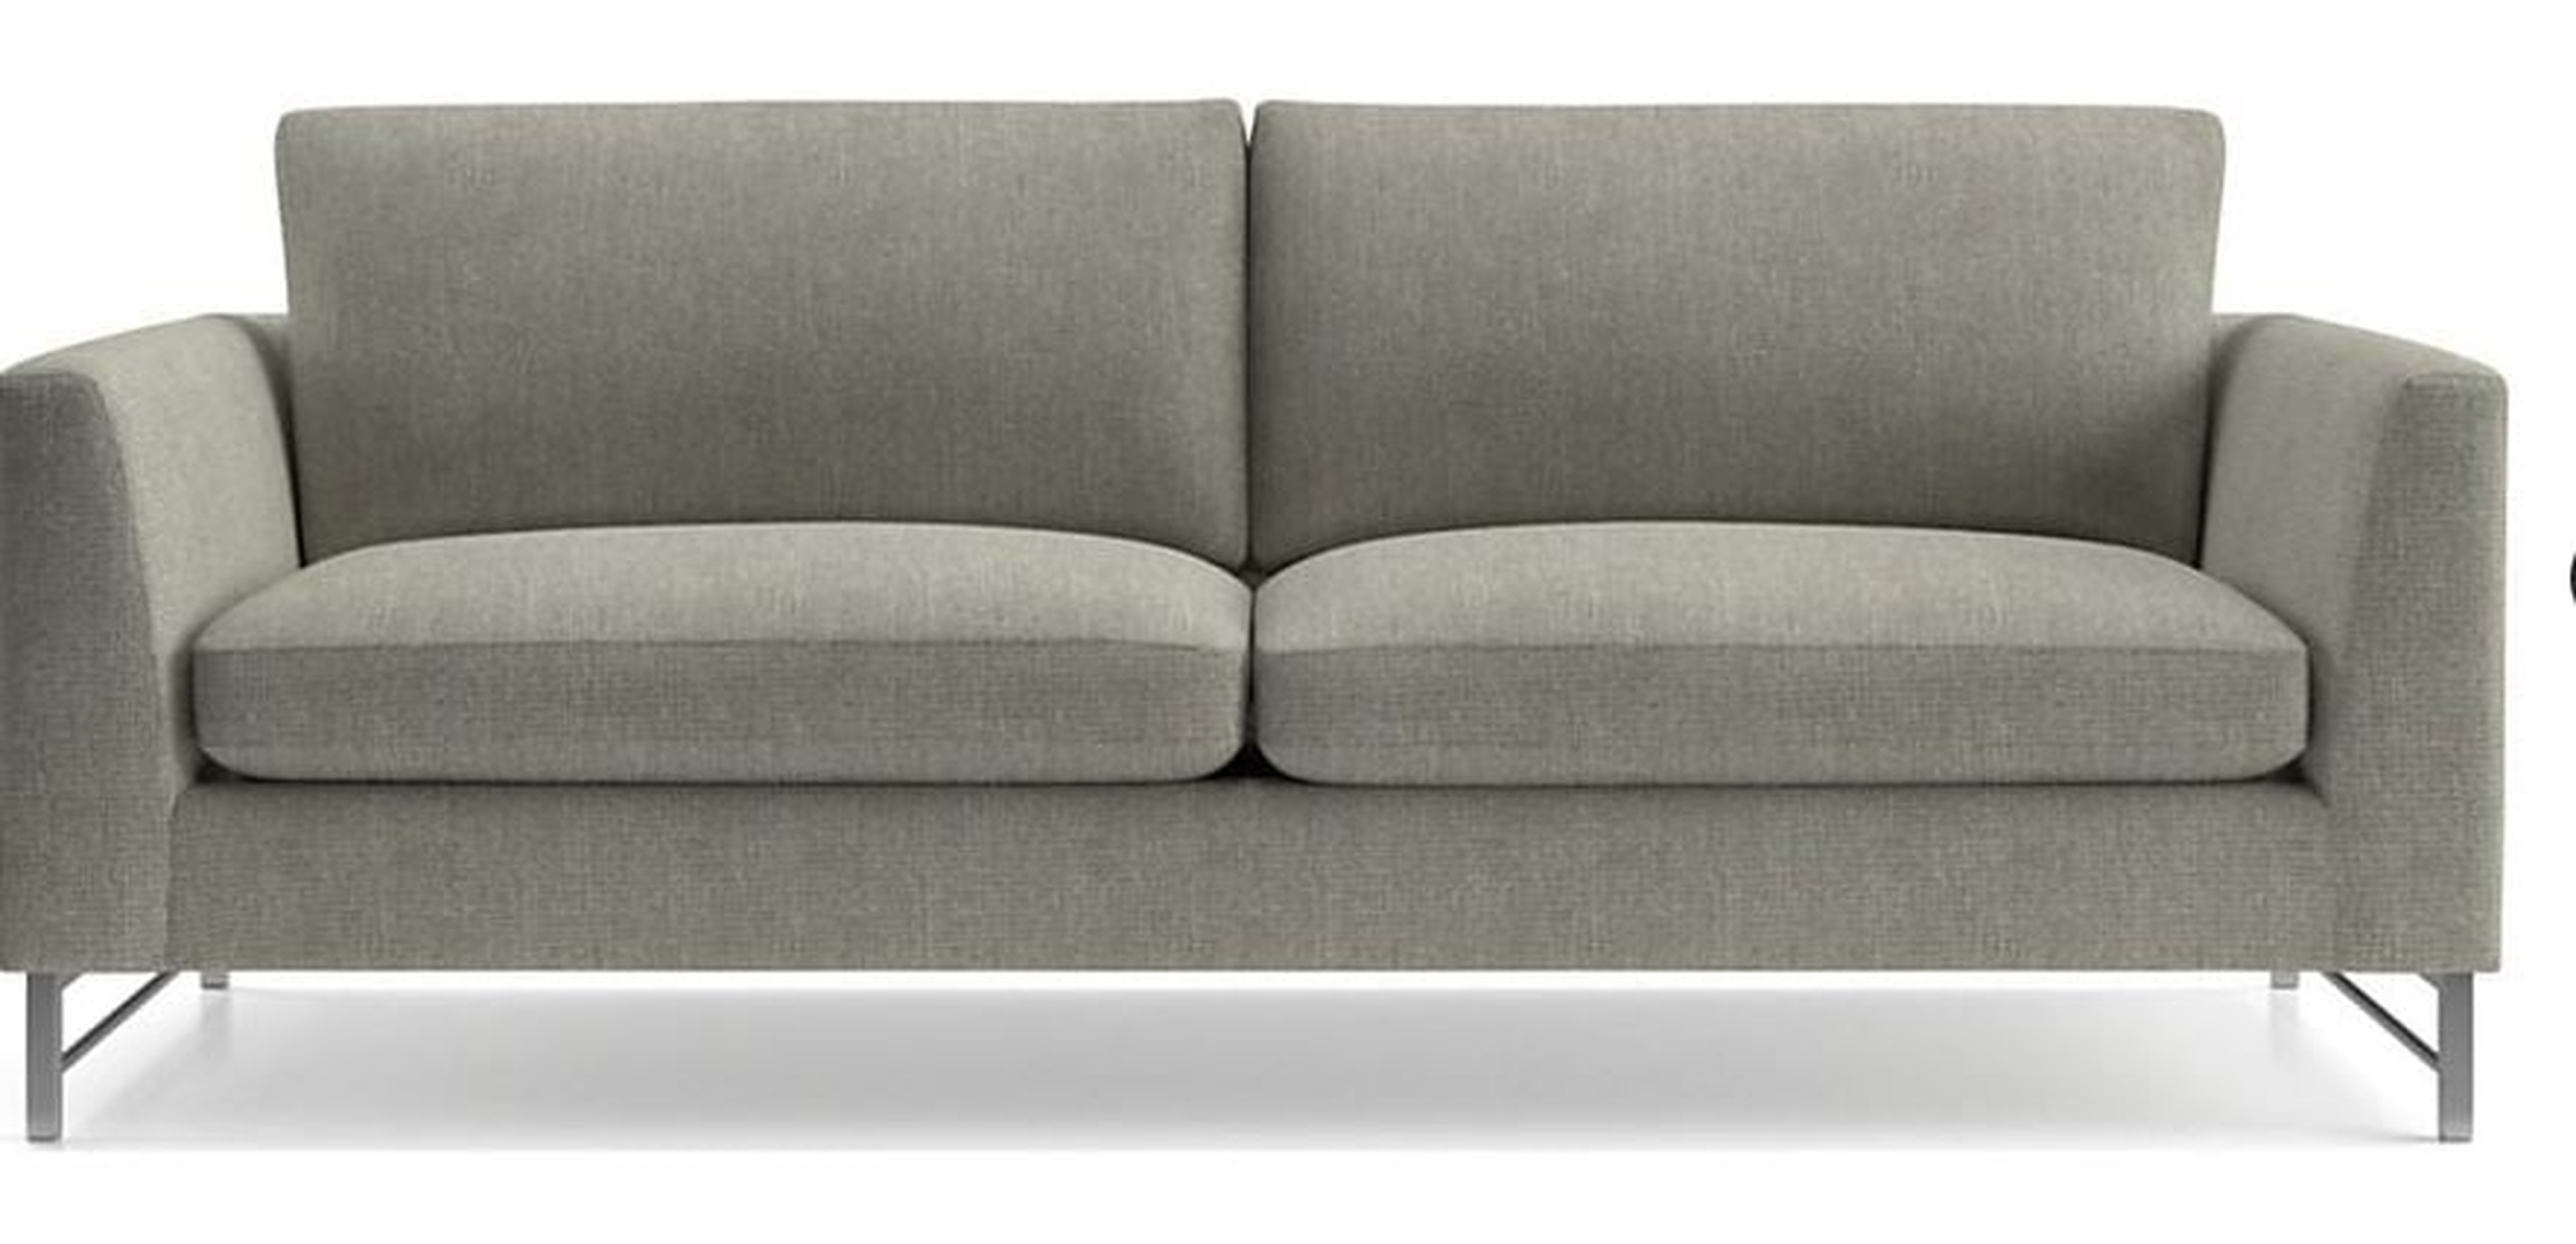 Tyson Sofa with Stainless Steel Base - Crate and Barrel